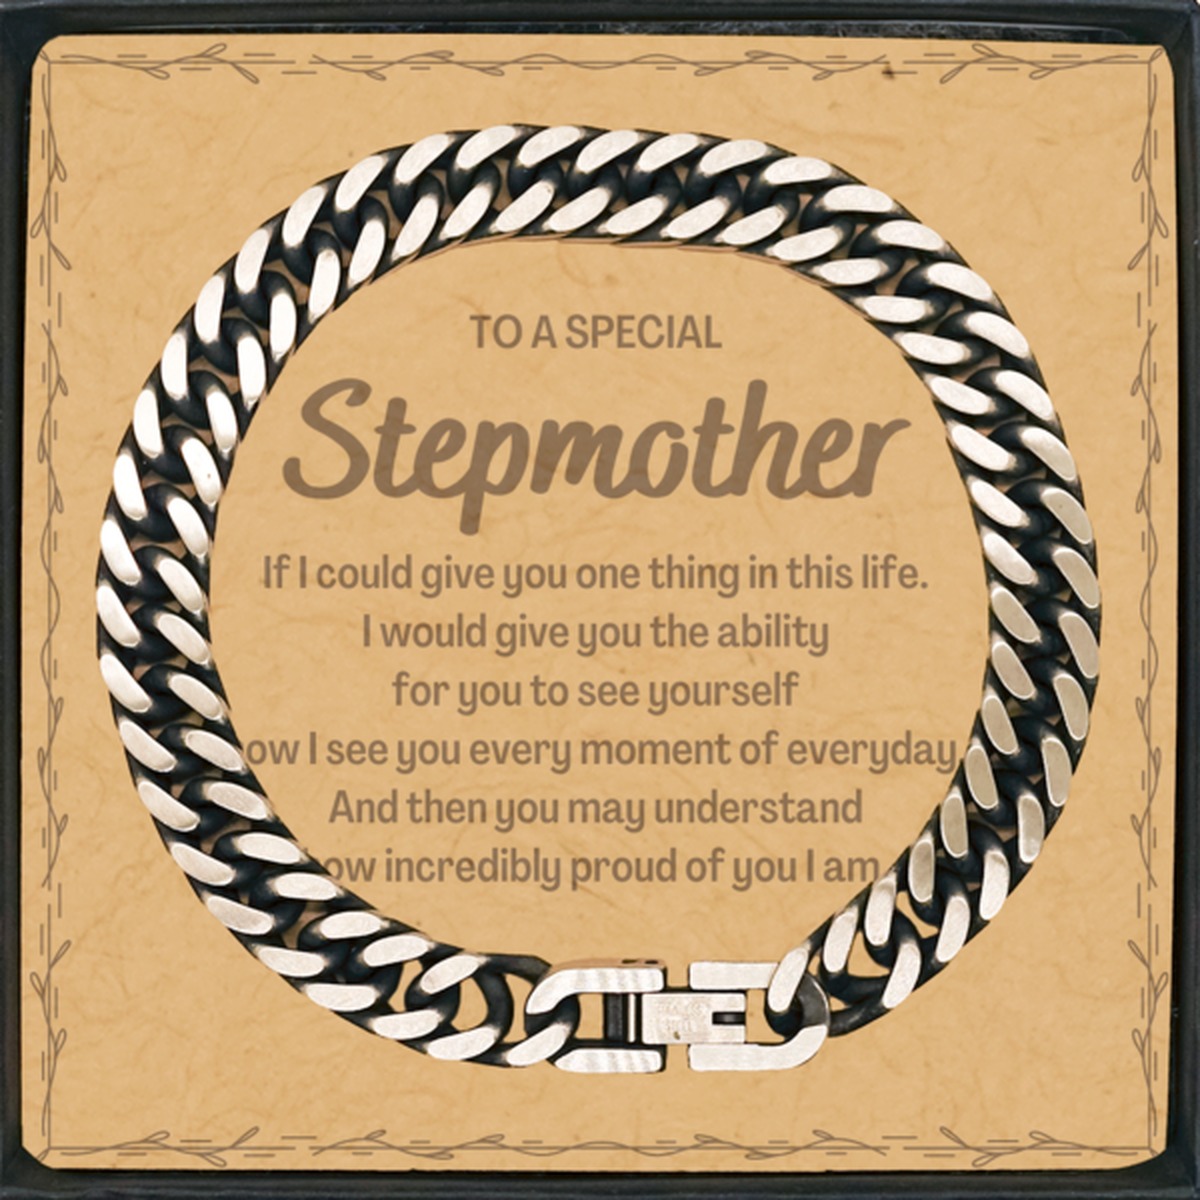 To My Stepmother Cuban Link Chain Bracelet, Gifts For Stepmother Message Card, Inspirational Gifts for Christmas Birthday, Epic Gifts for Stepmother To A Special Stepmother how incredibly proud of you I am